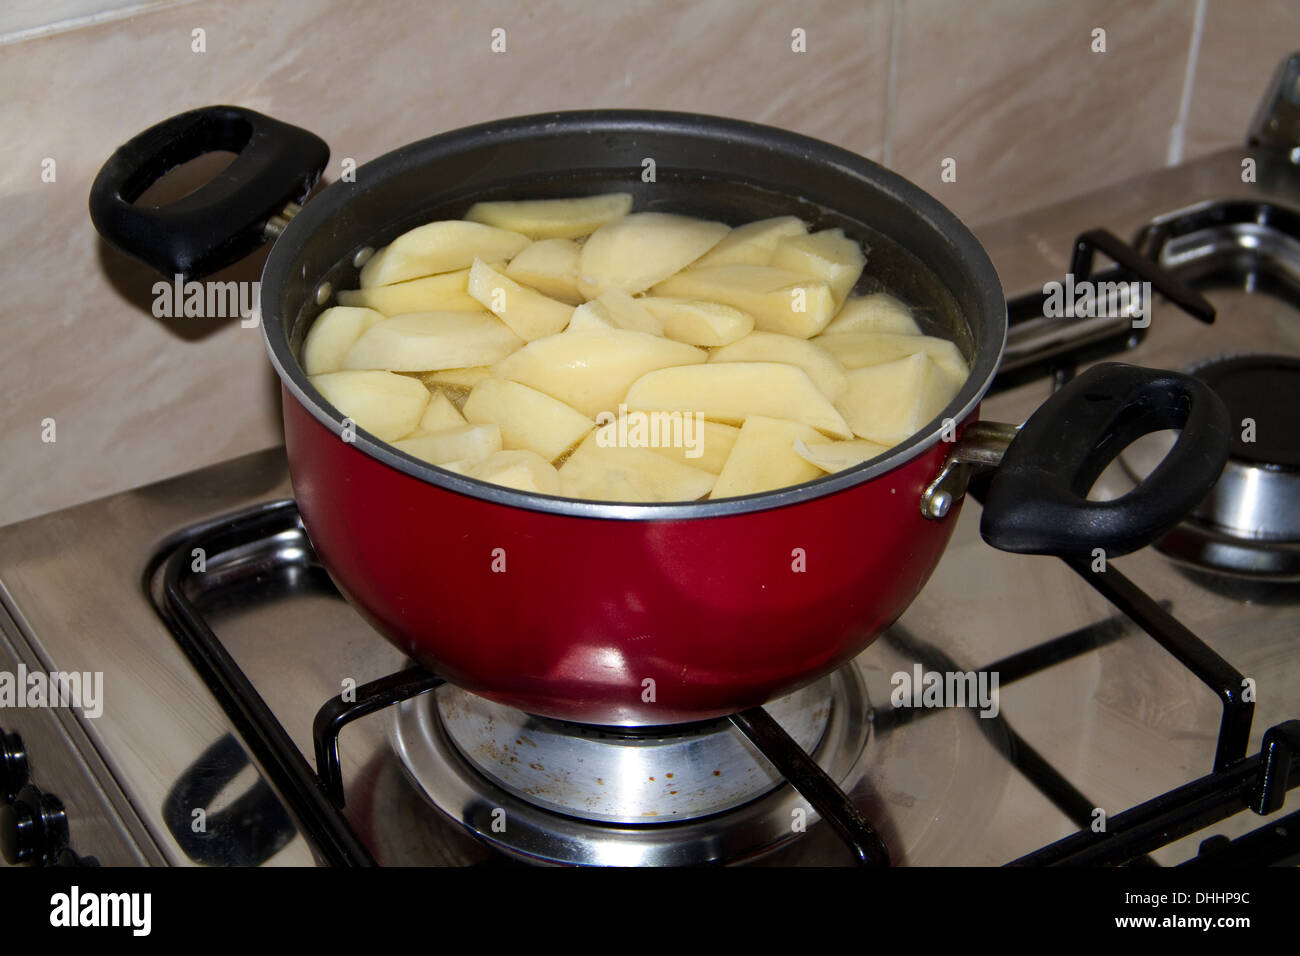 Cooking Potatoes in Cooking Pot Stock Photo